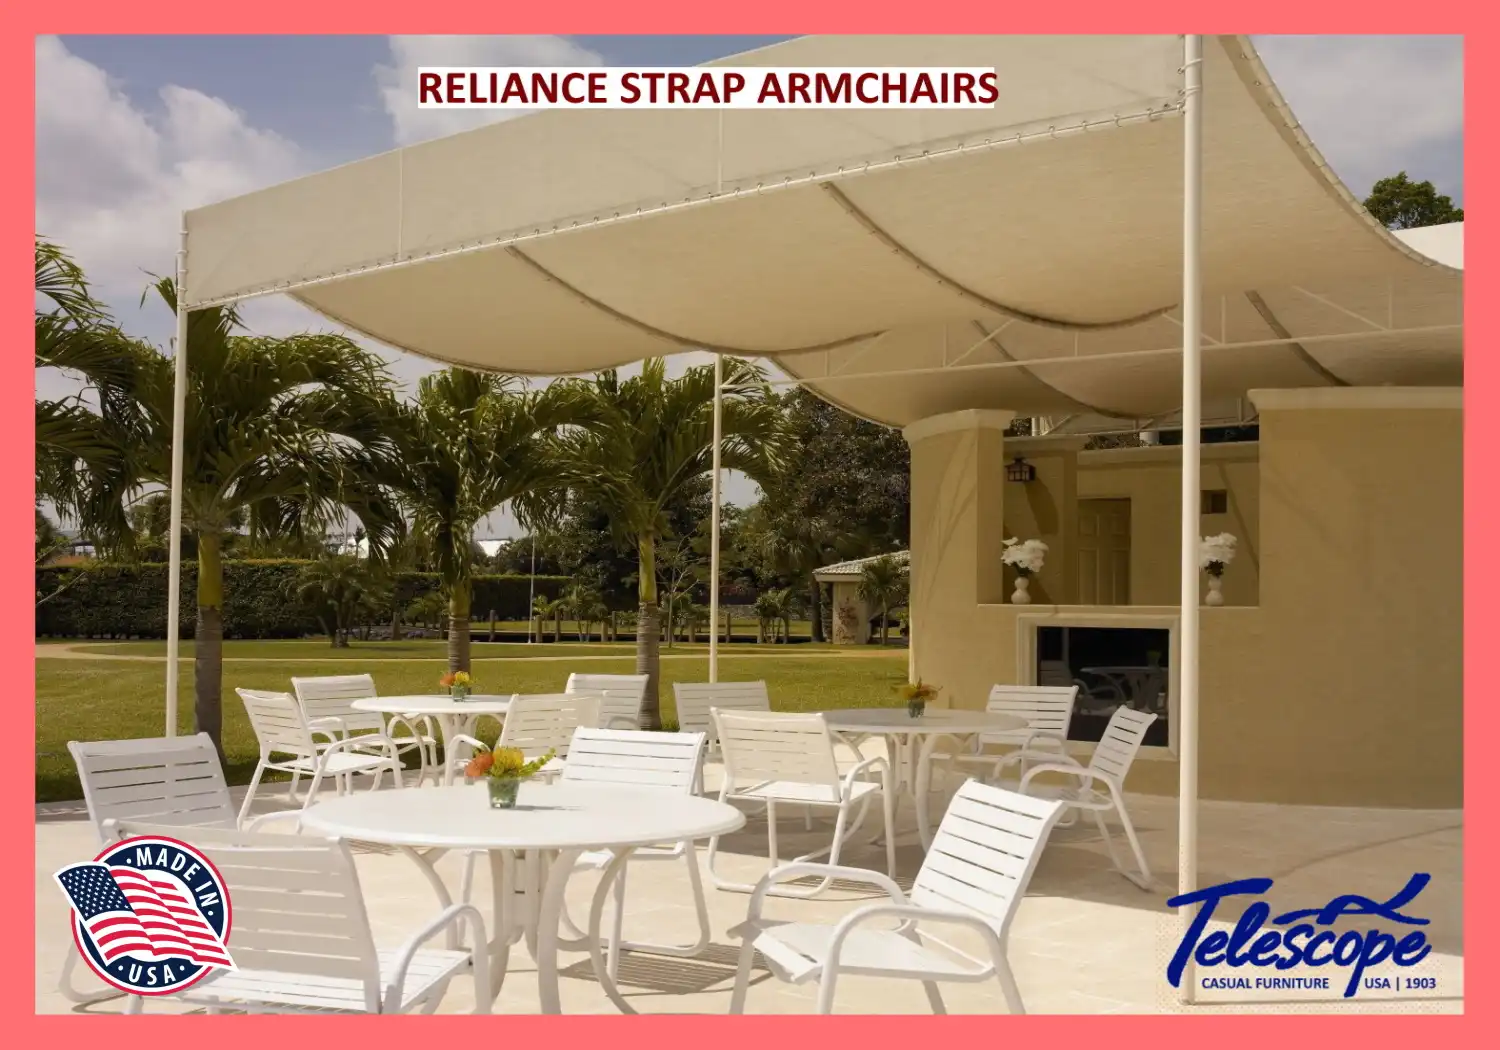 RELIANCE STRAP ARMCHAIRS